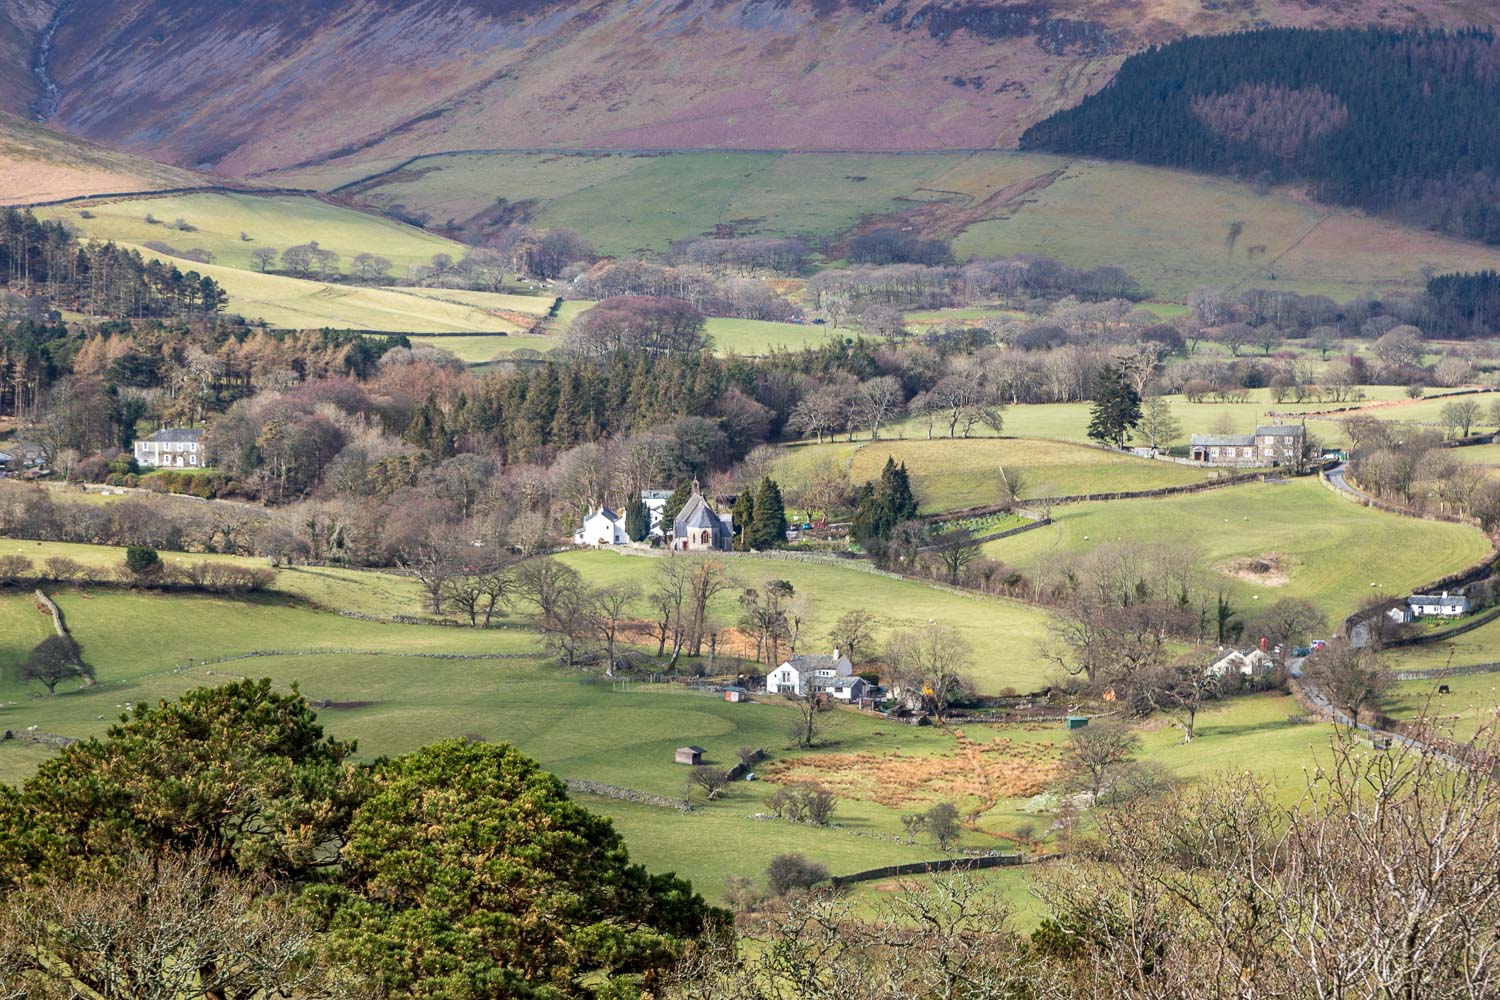 Loweswater and its church